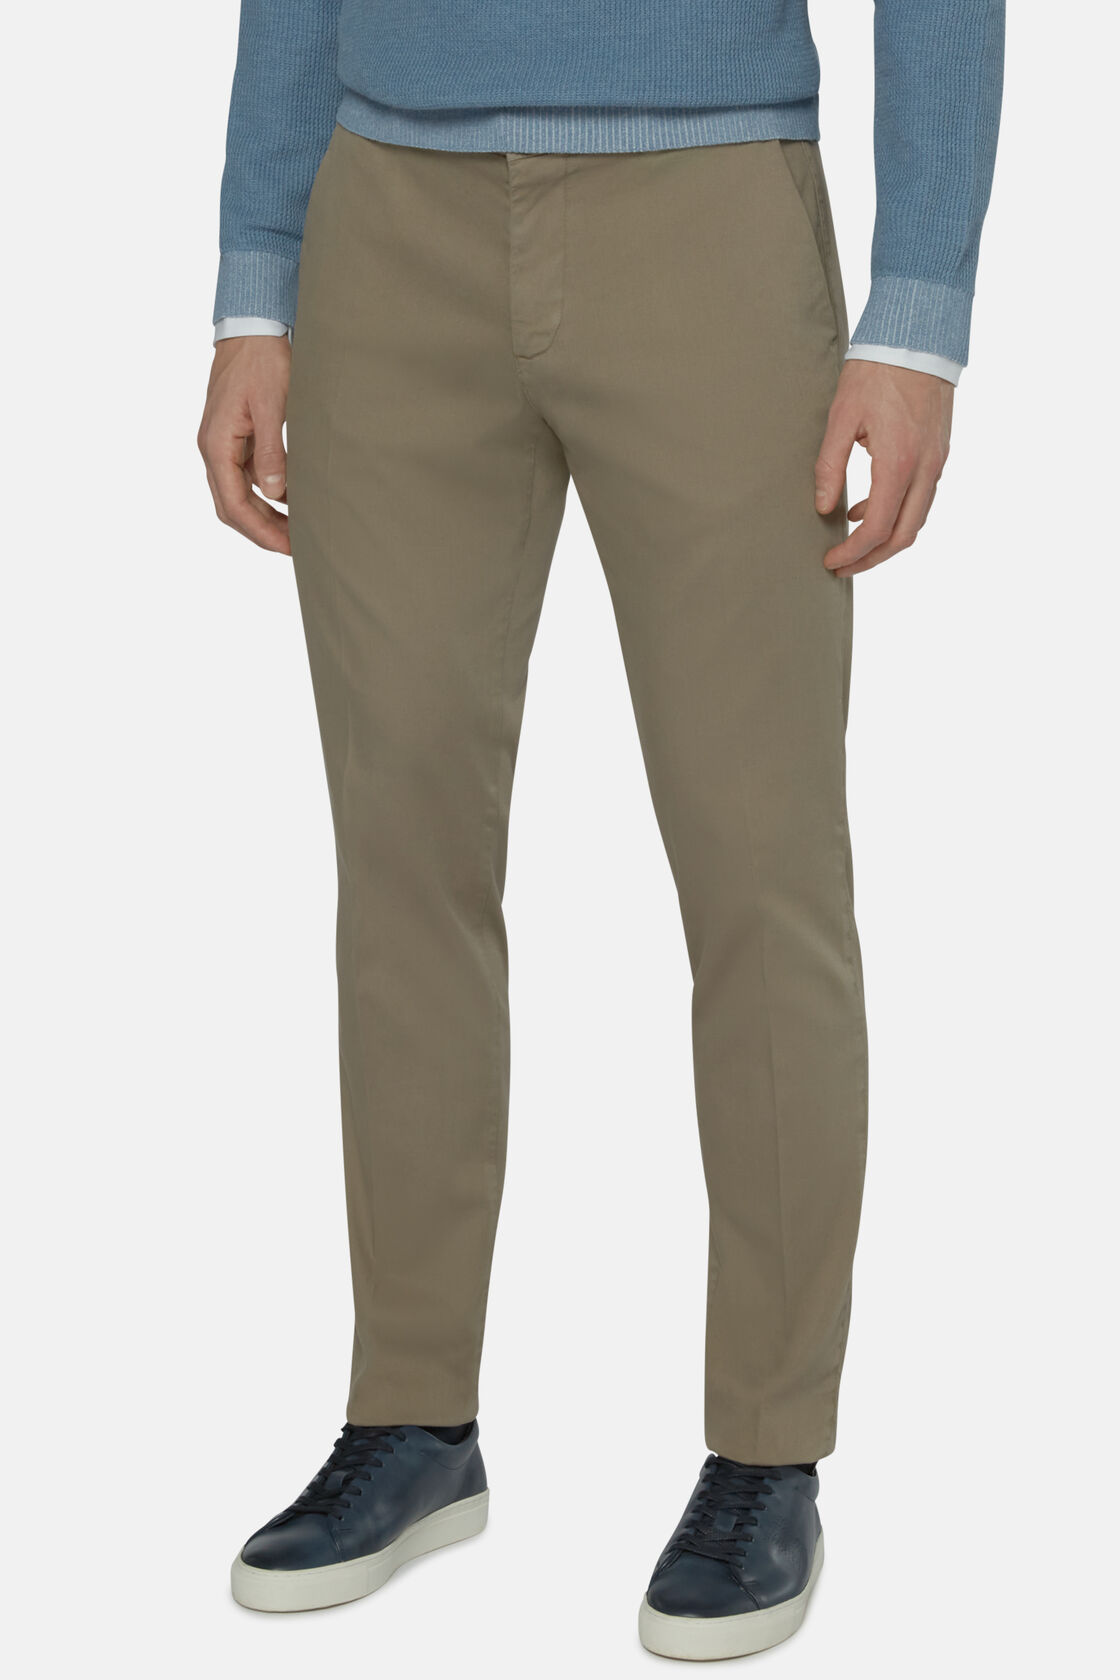 Stretch Cotton/Tencel Trousers, Taupe, hi-res